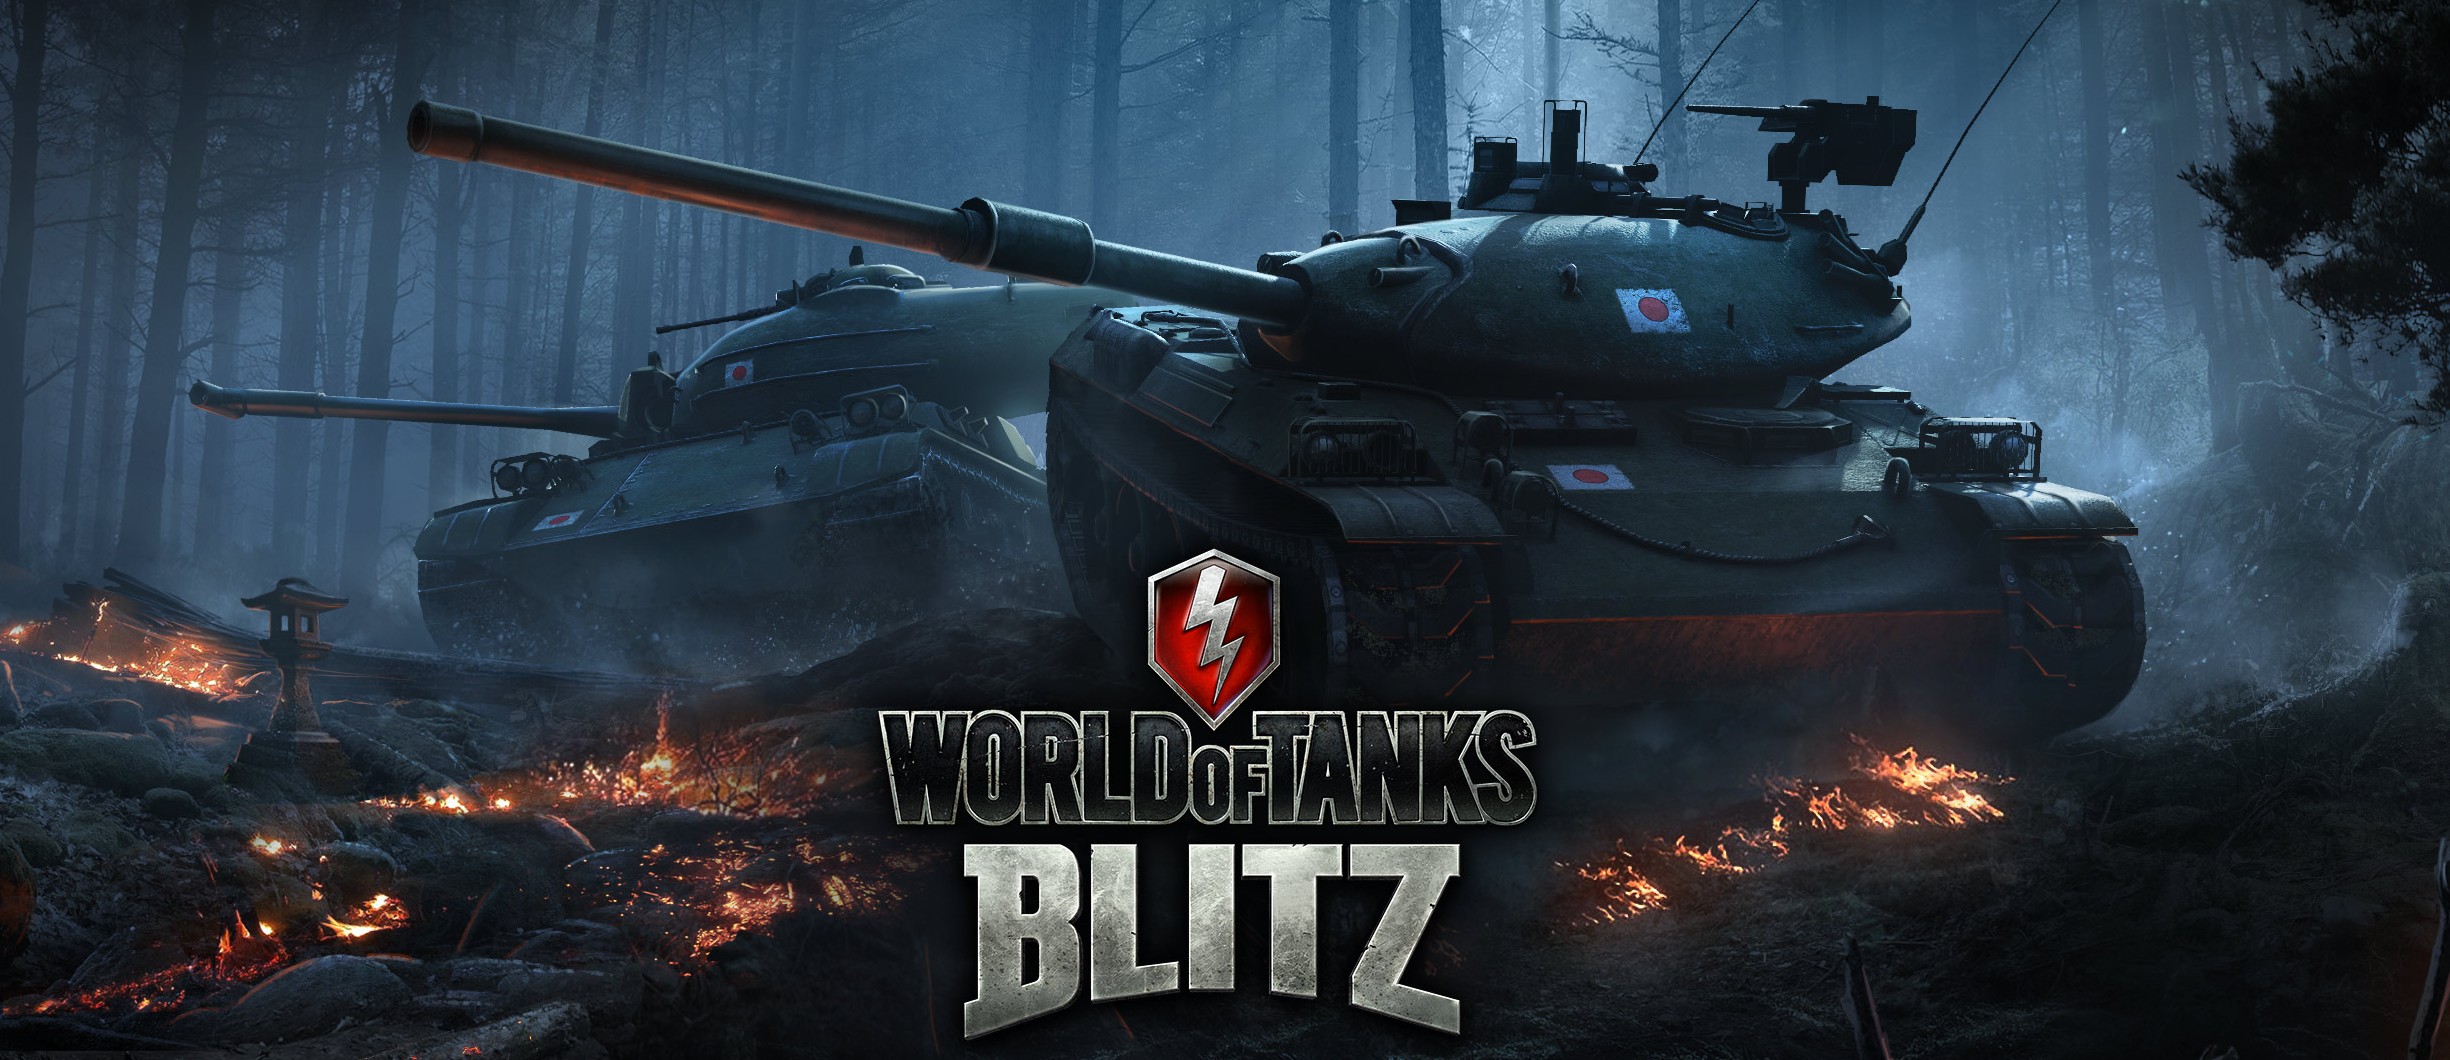 world of tanks blitz how to form a 3 person platoon reddit